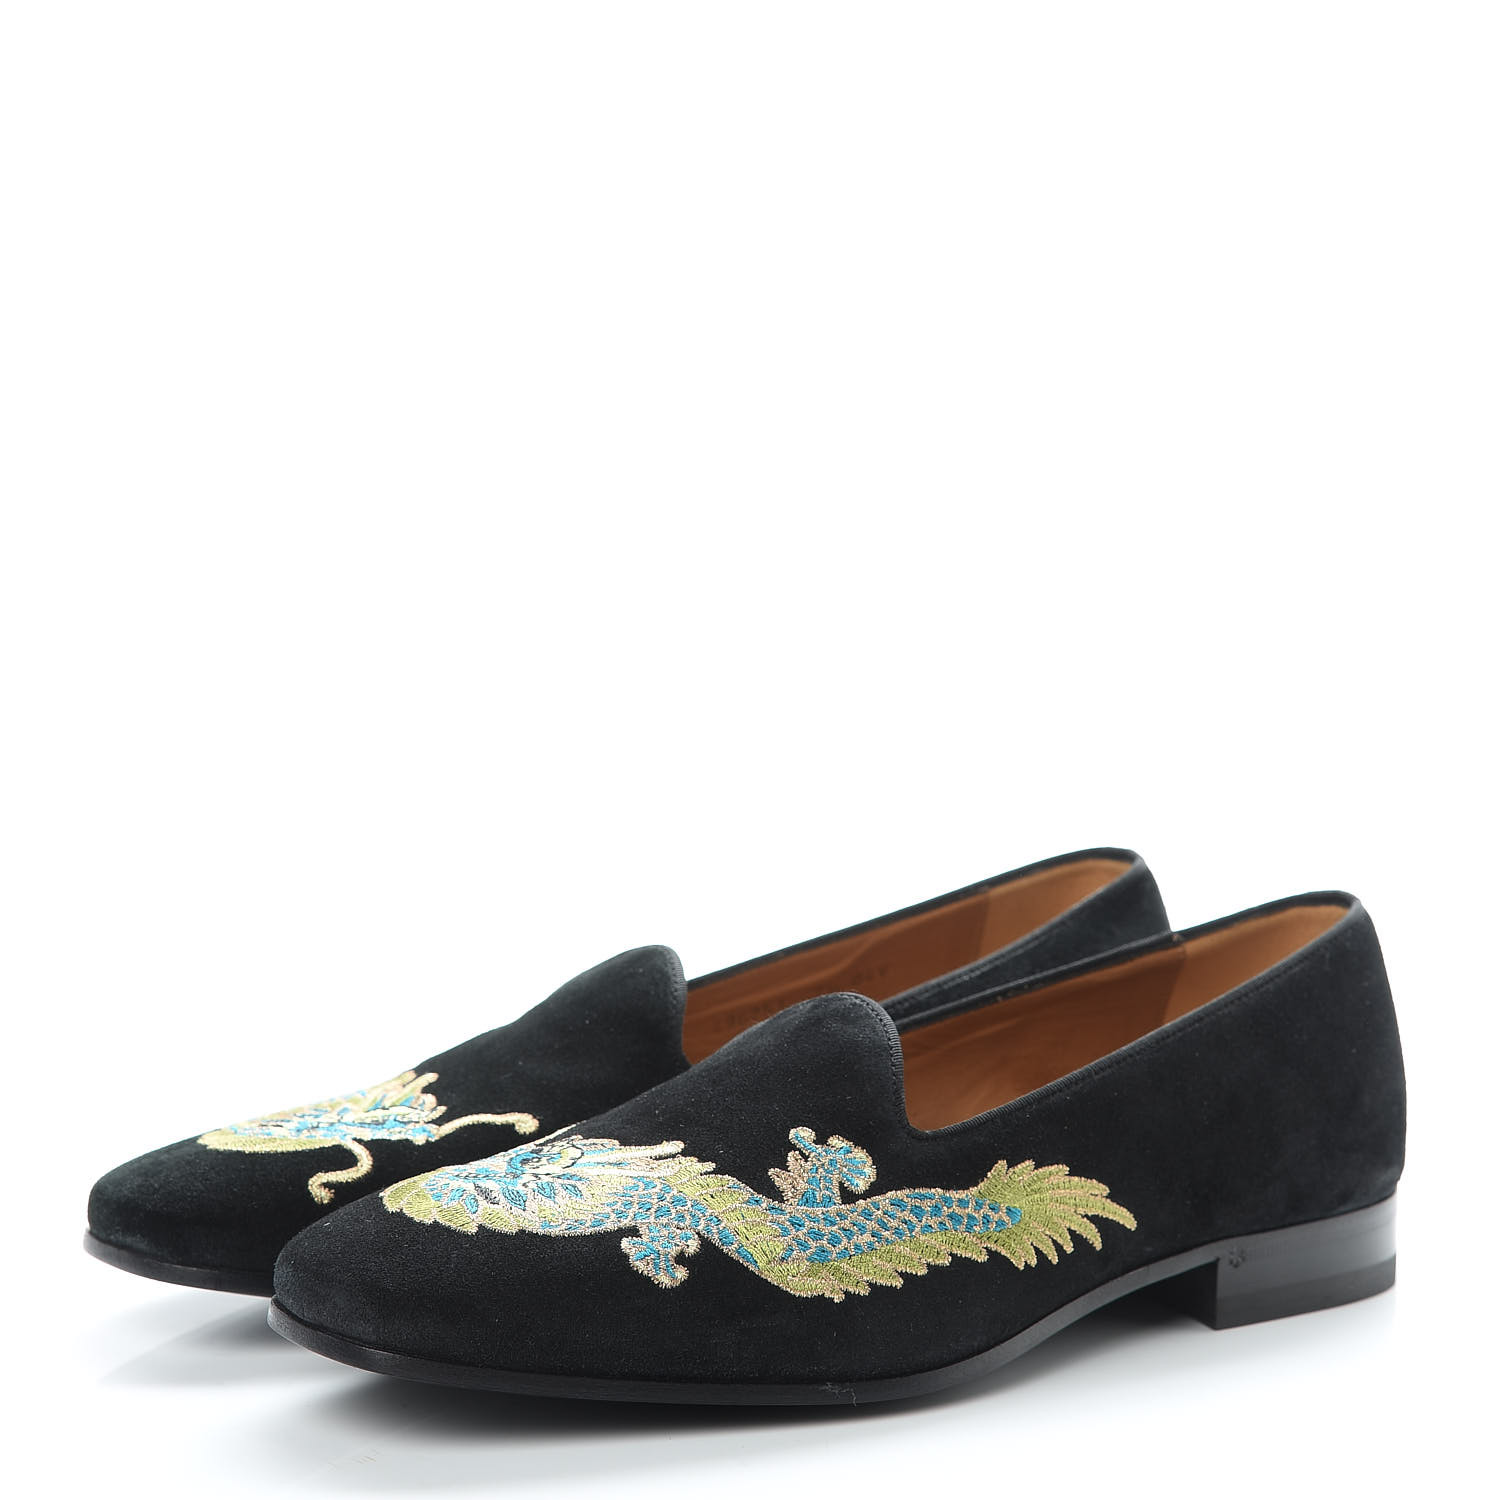 GUCCI Suede Mens Dragon Embroidered Loafers 7.5 Black 480249